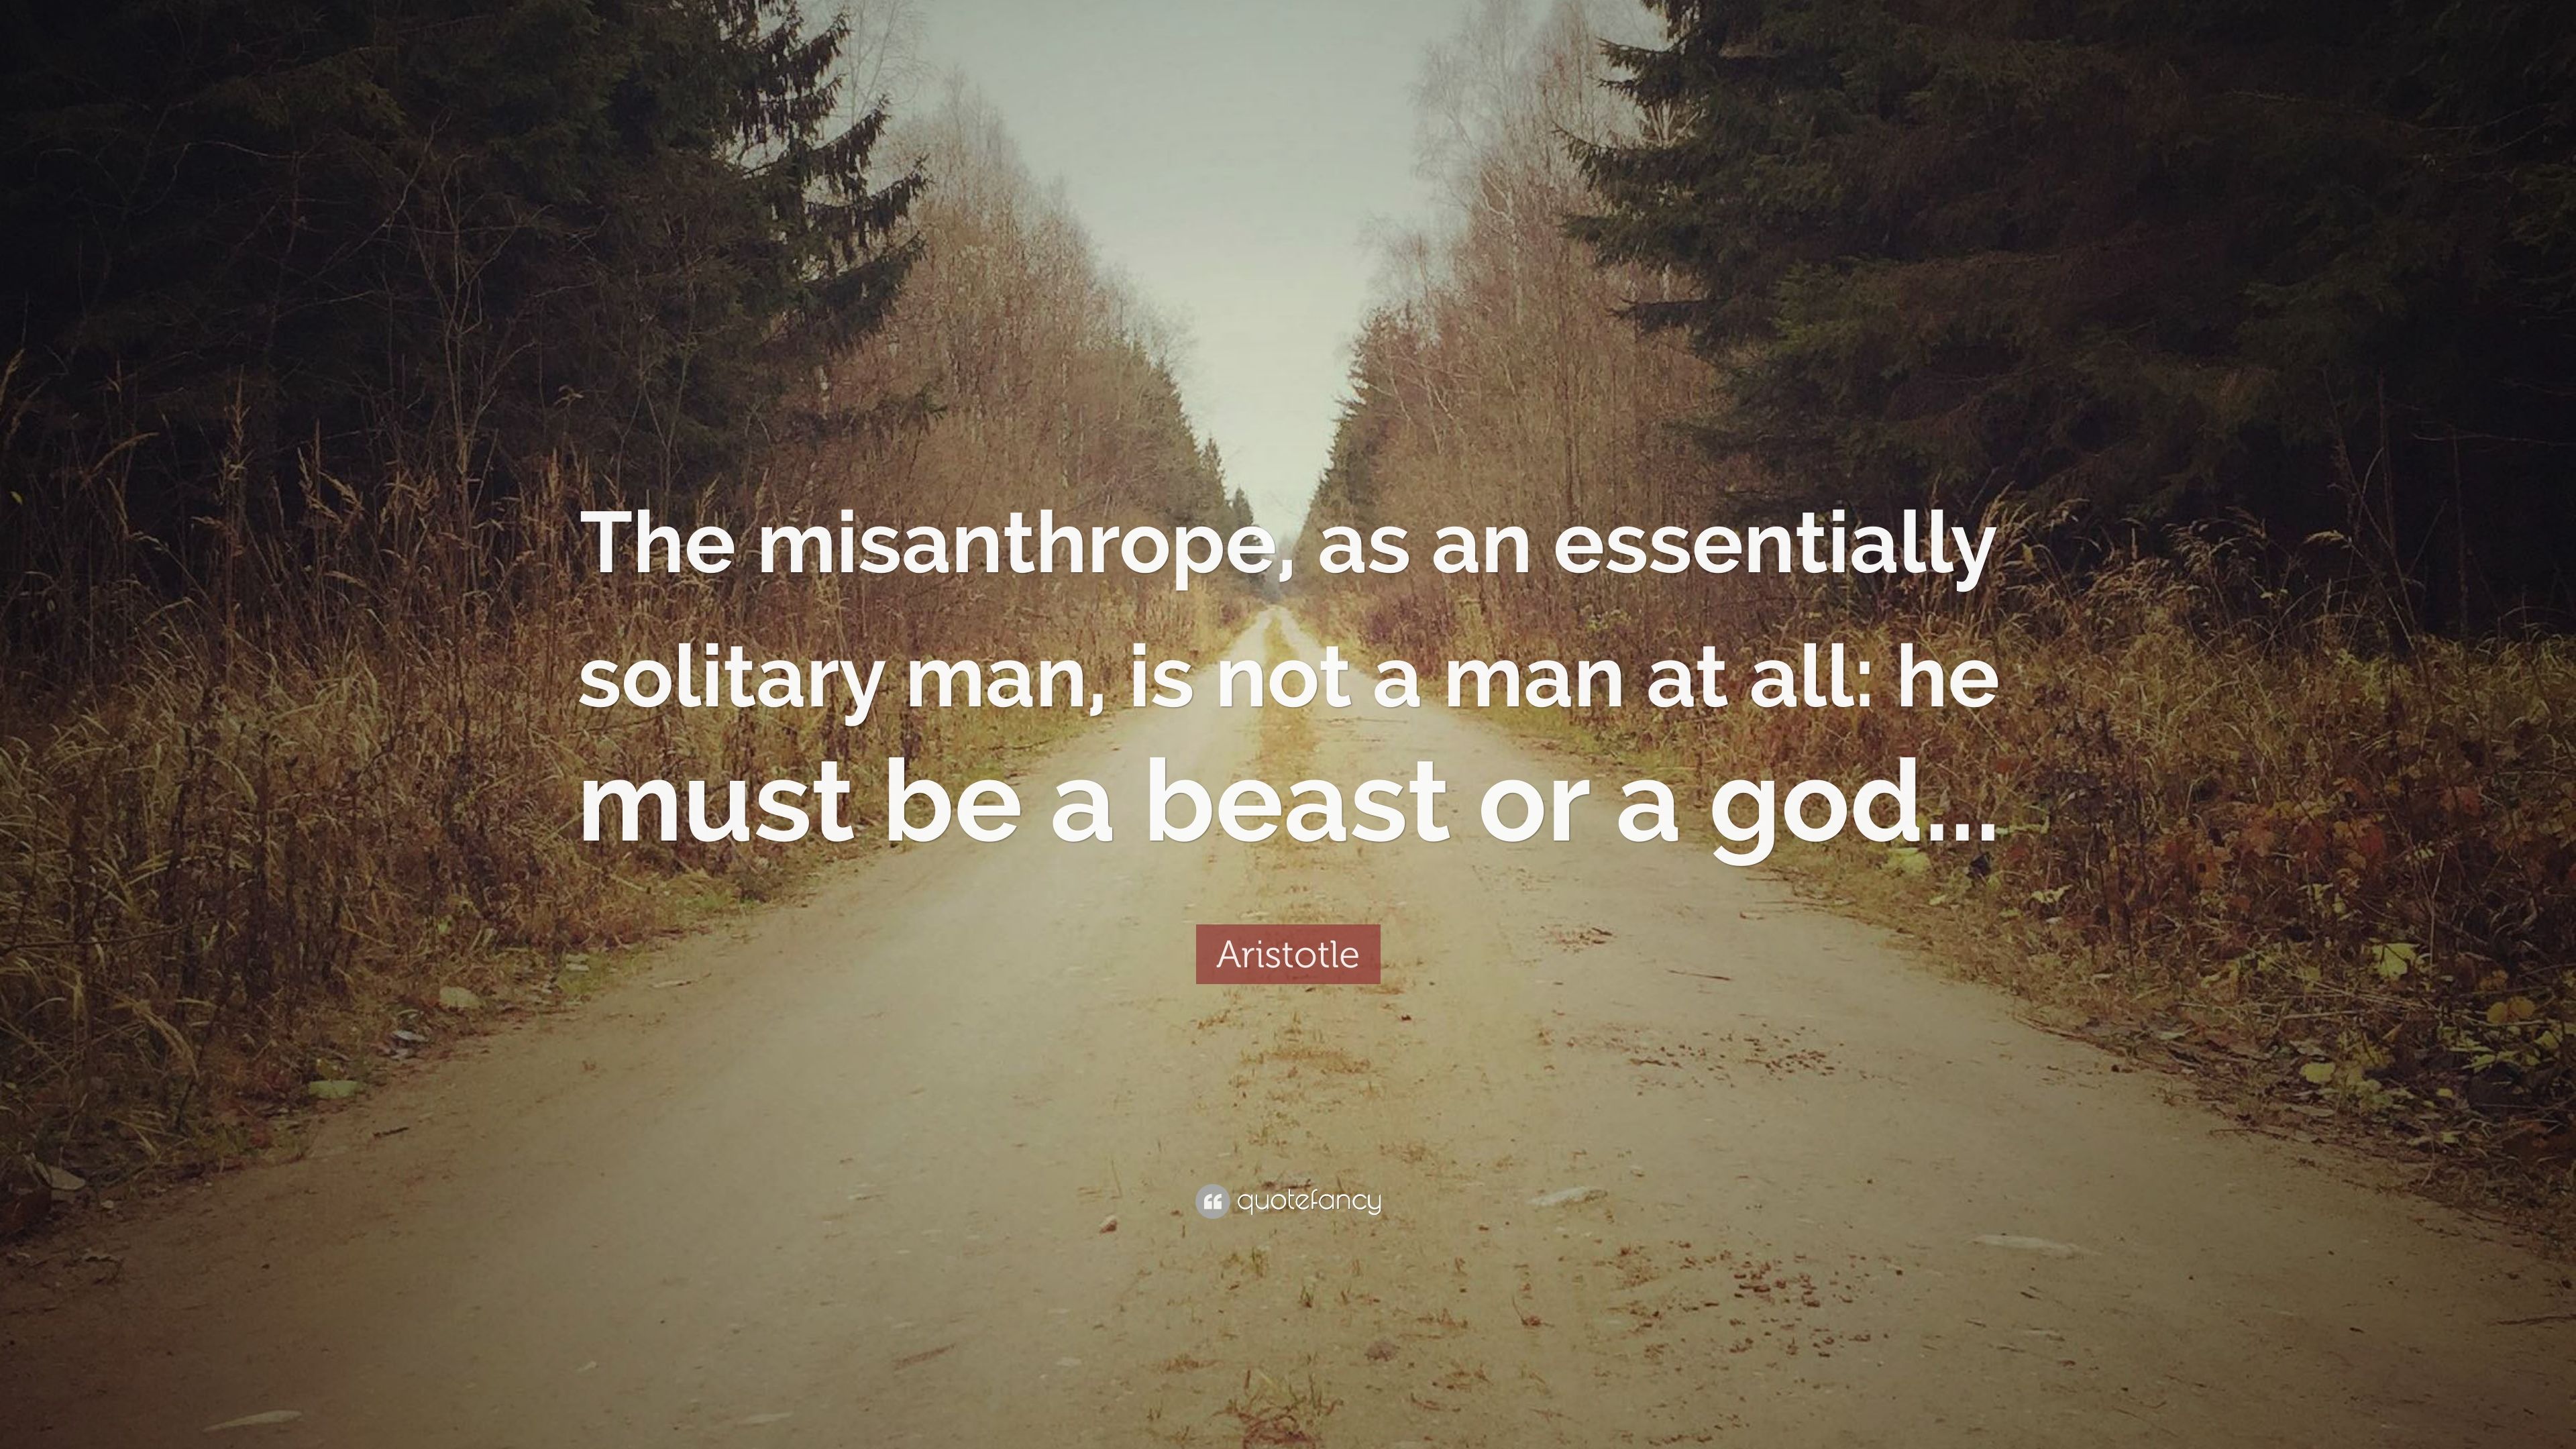 Aristotle Quote: “The misanthrope, as an essentially solitary man, is not a man at all: he